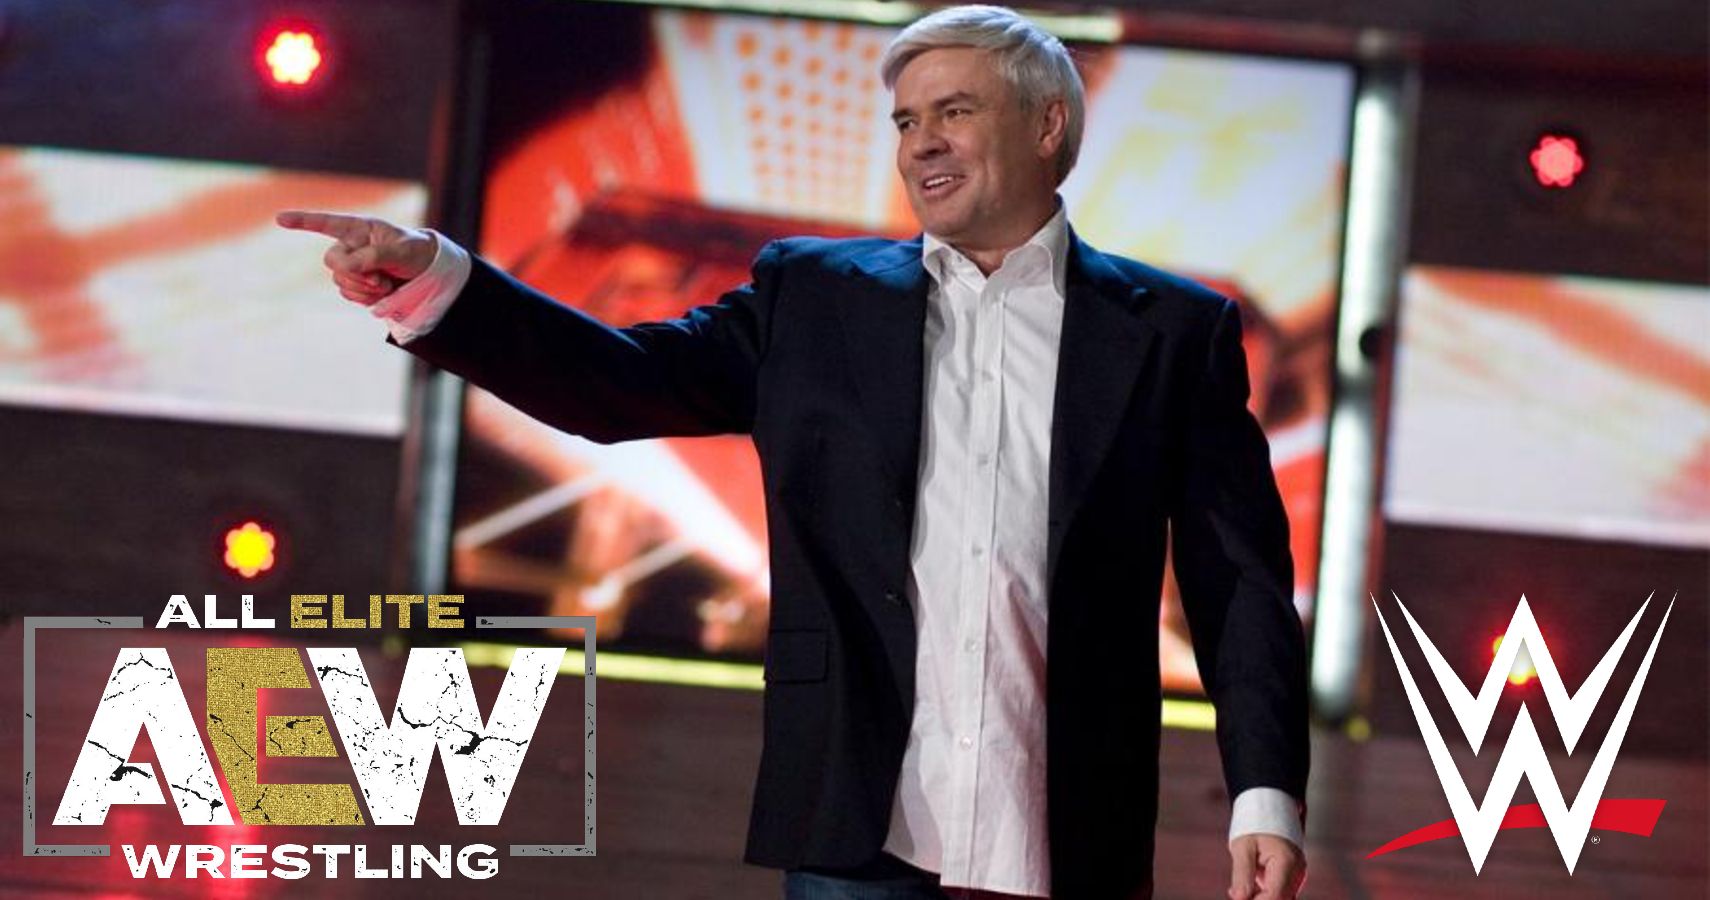 WCW legend and WWE Hall of Famer Eric Bischoff advice for AEW